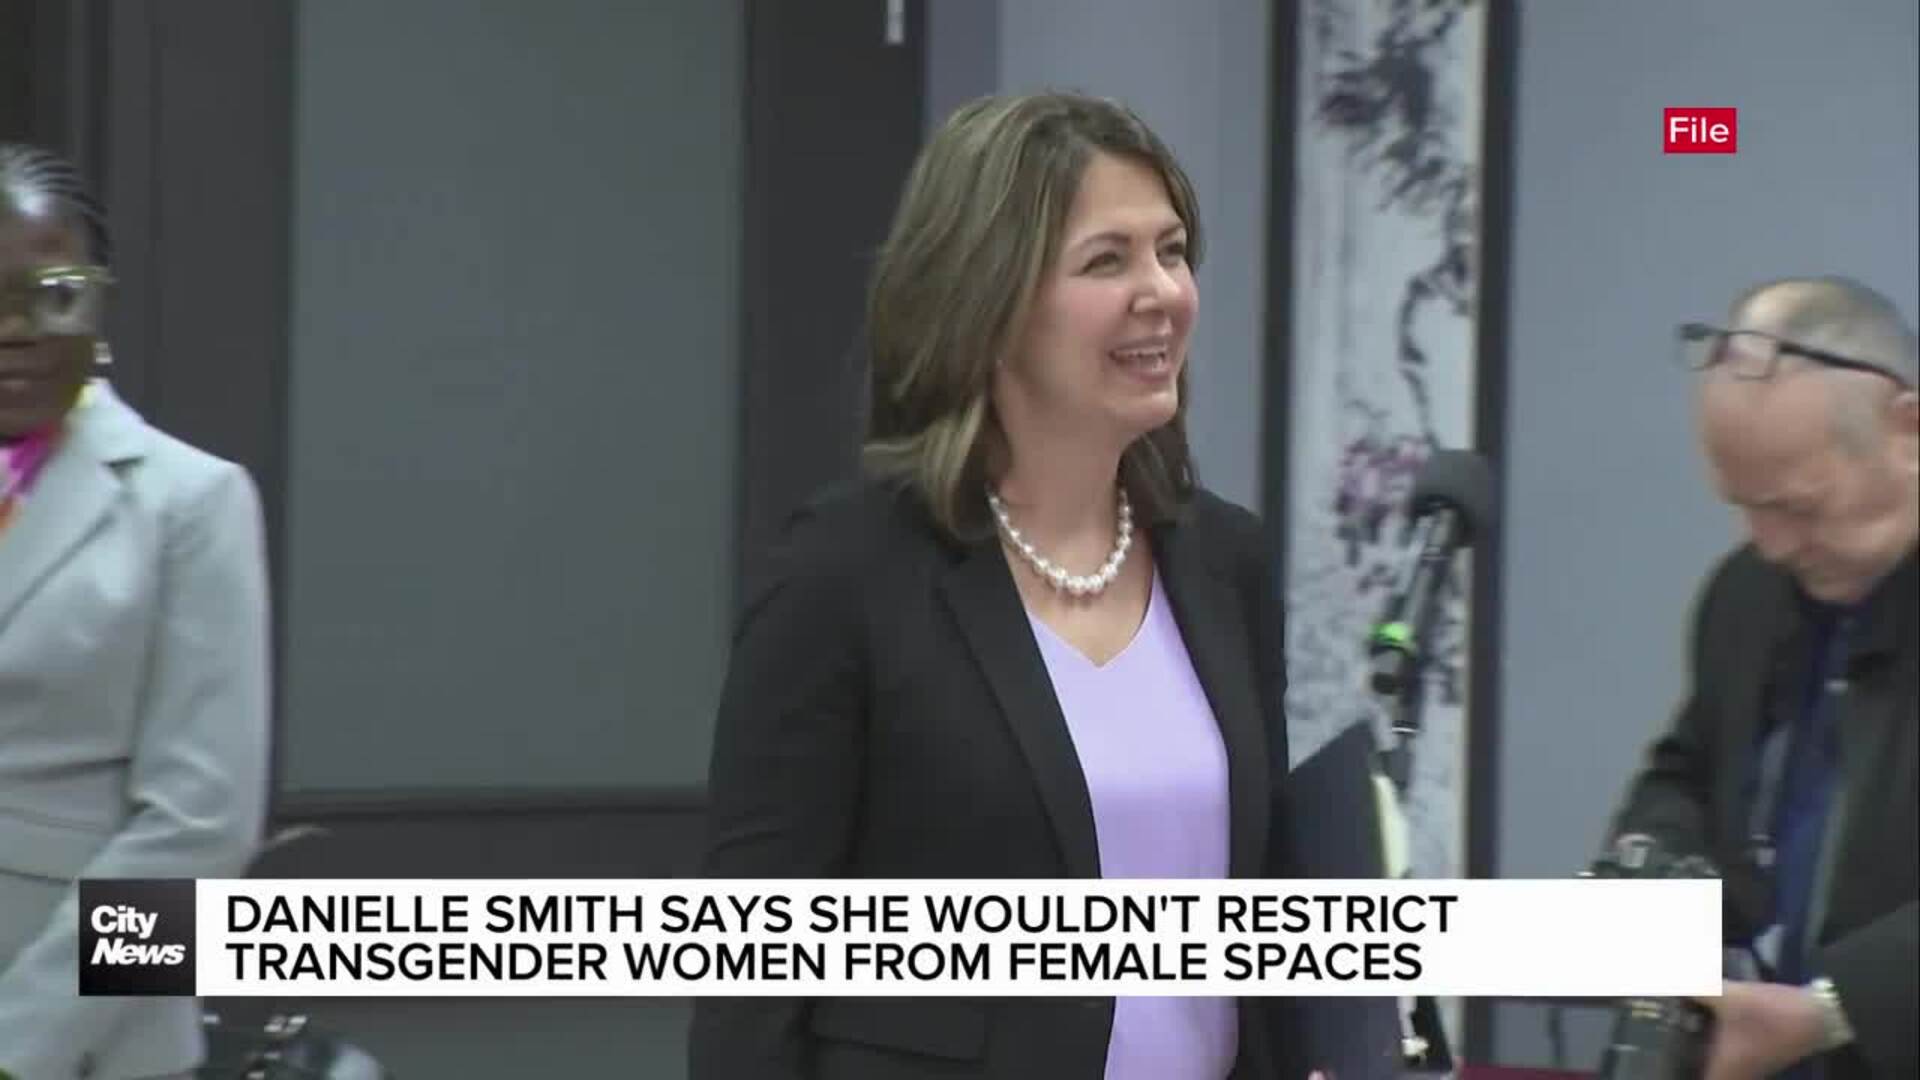 Danielle Smith says she wouldn’t restrict transgender women from female spaces